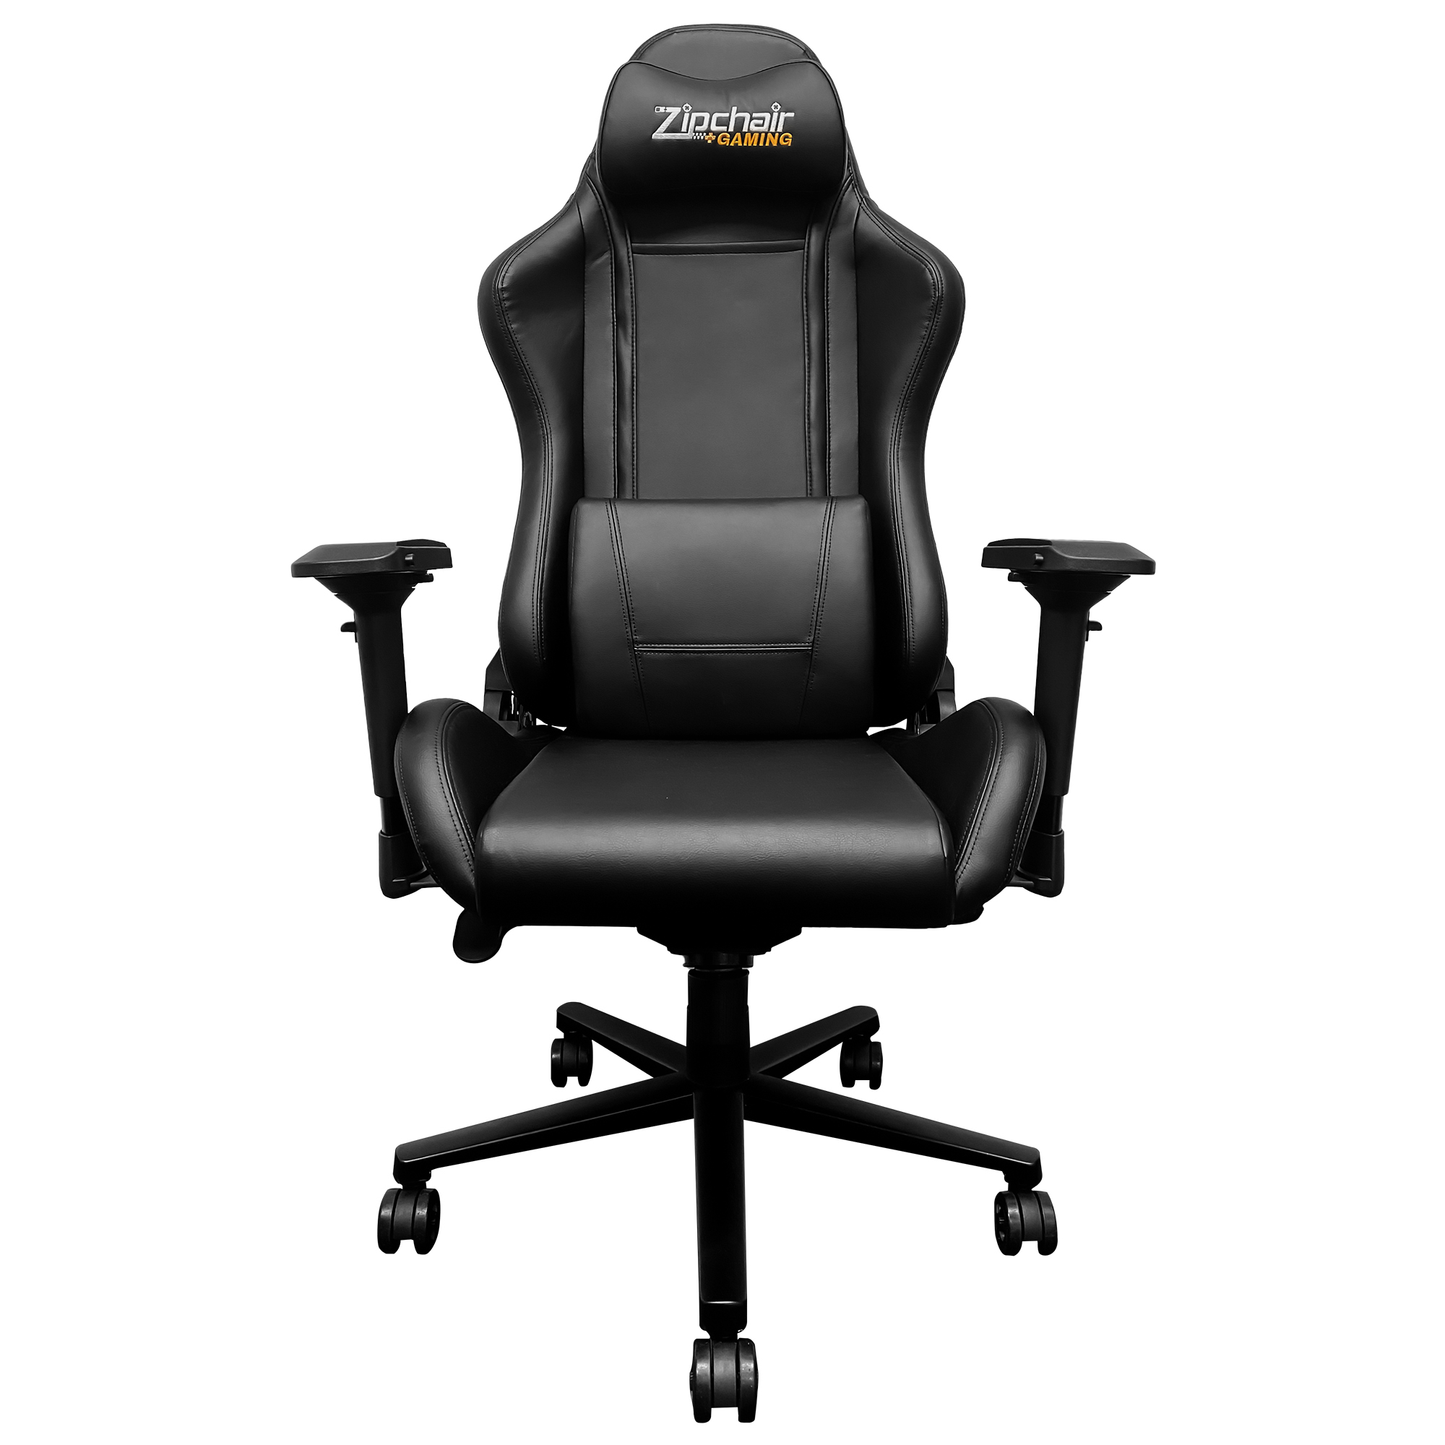 Xpression Pro Gaming Chair with GMC Primary Logo